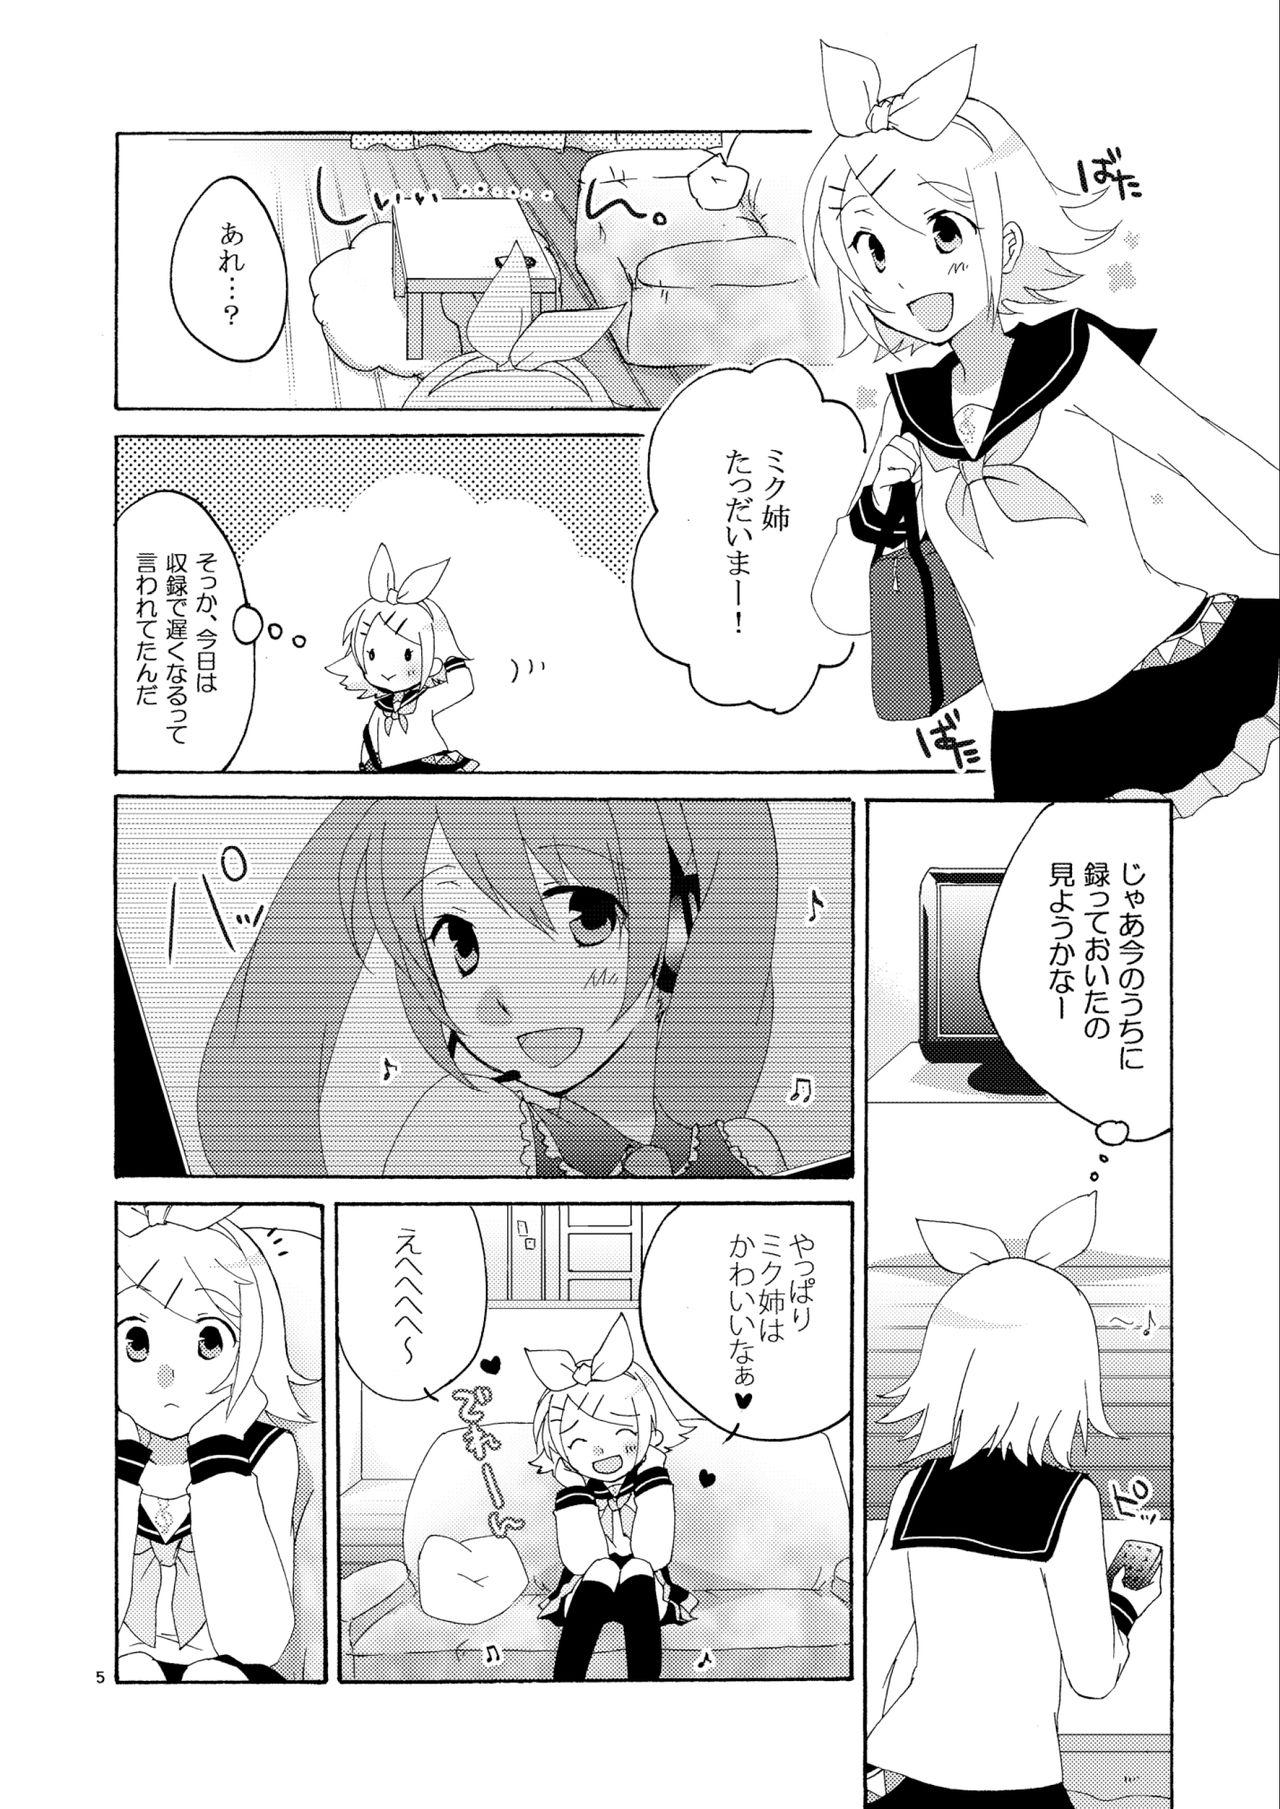 Latino Hanny Box - Vocaloid Oldvsyoung - Page 4